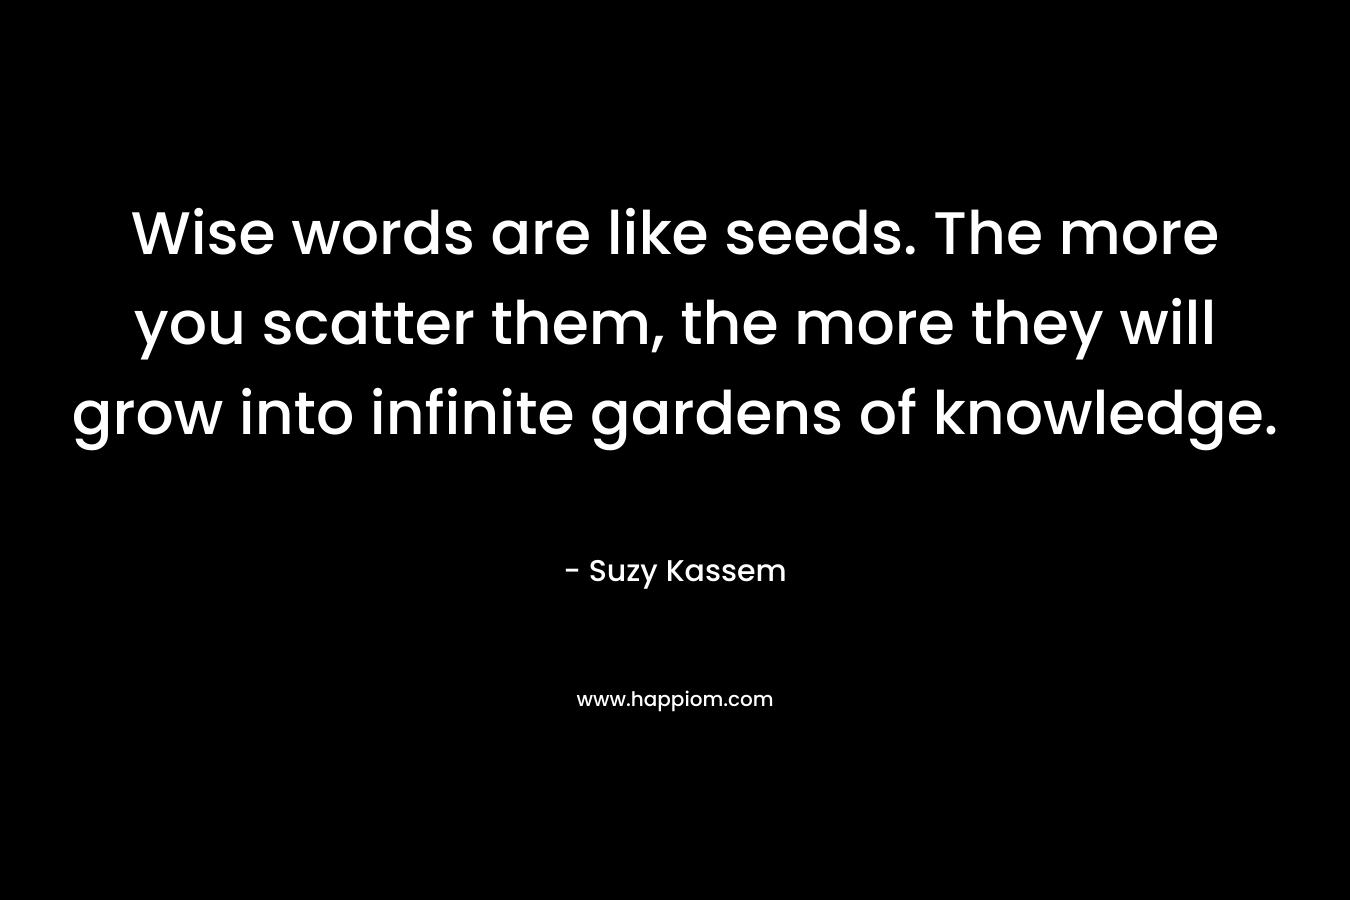 Wise words are like seeds. The more you scatter them, the more they will grow into infinite gardens of knowledge.